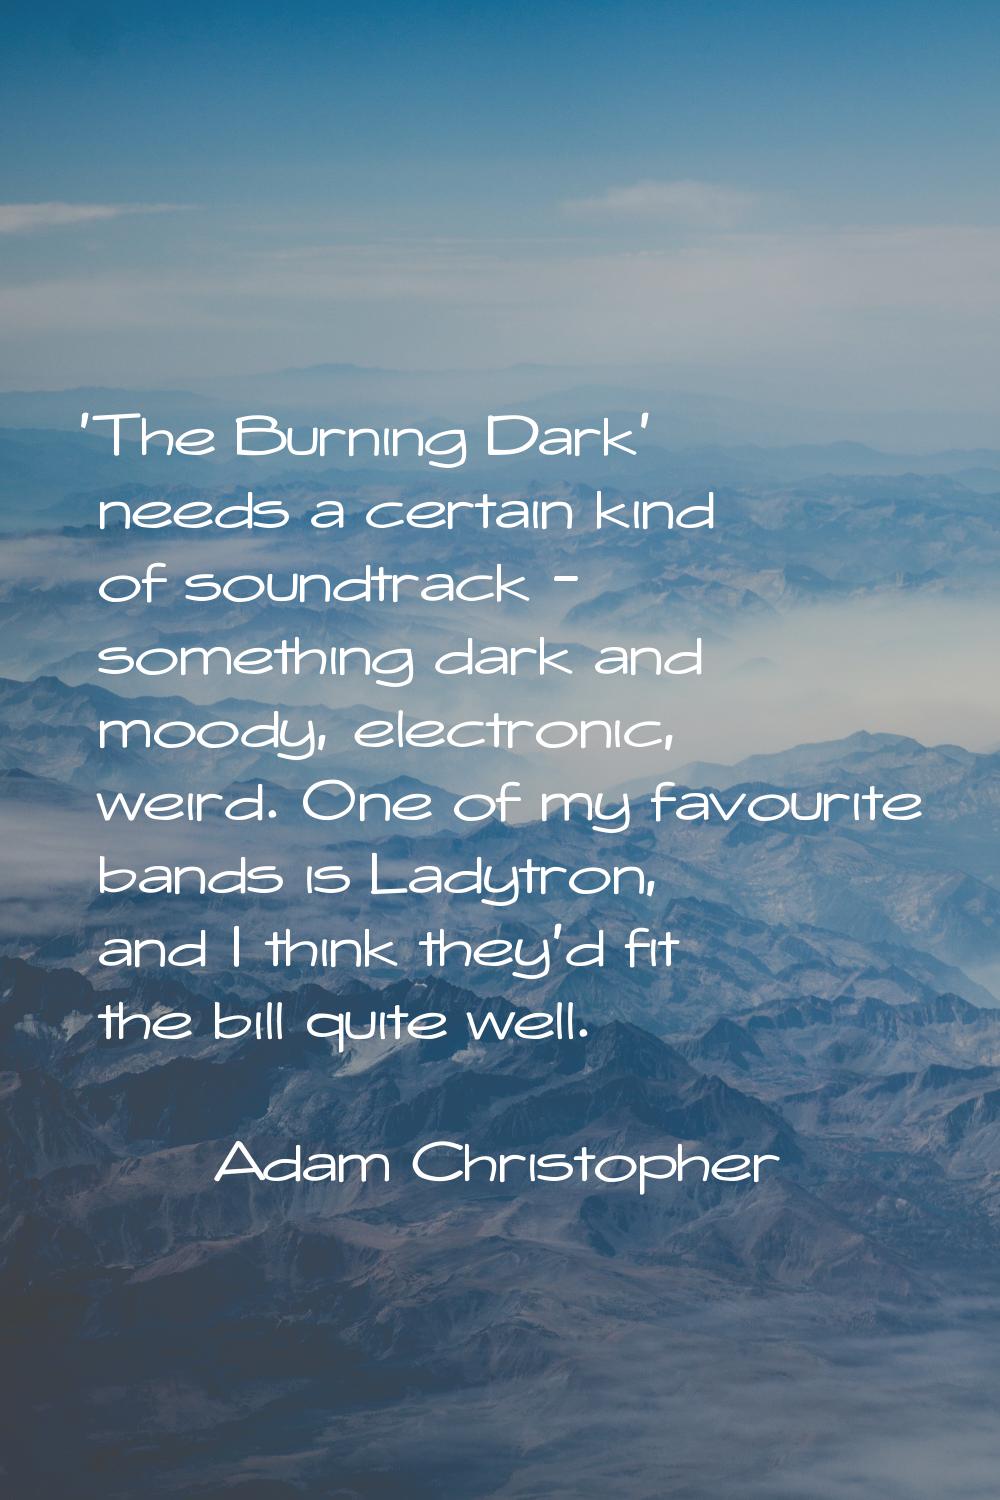 'The Burning Dark' needs a certain kind of soundtrack - something dark and moody, electronic, weird